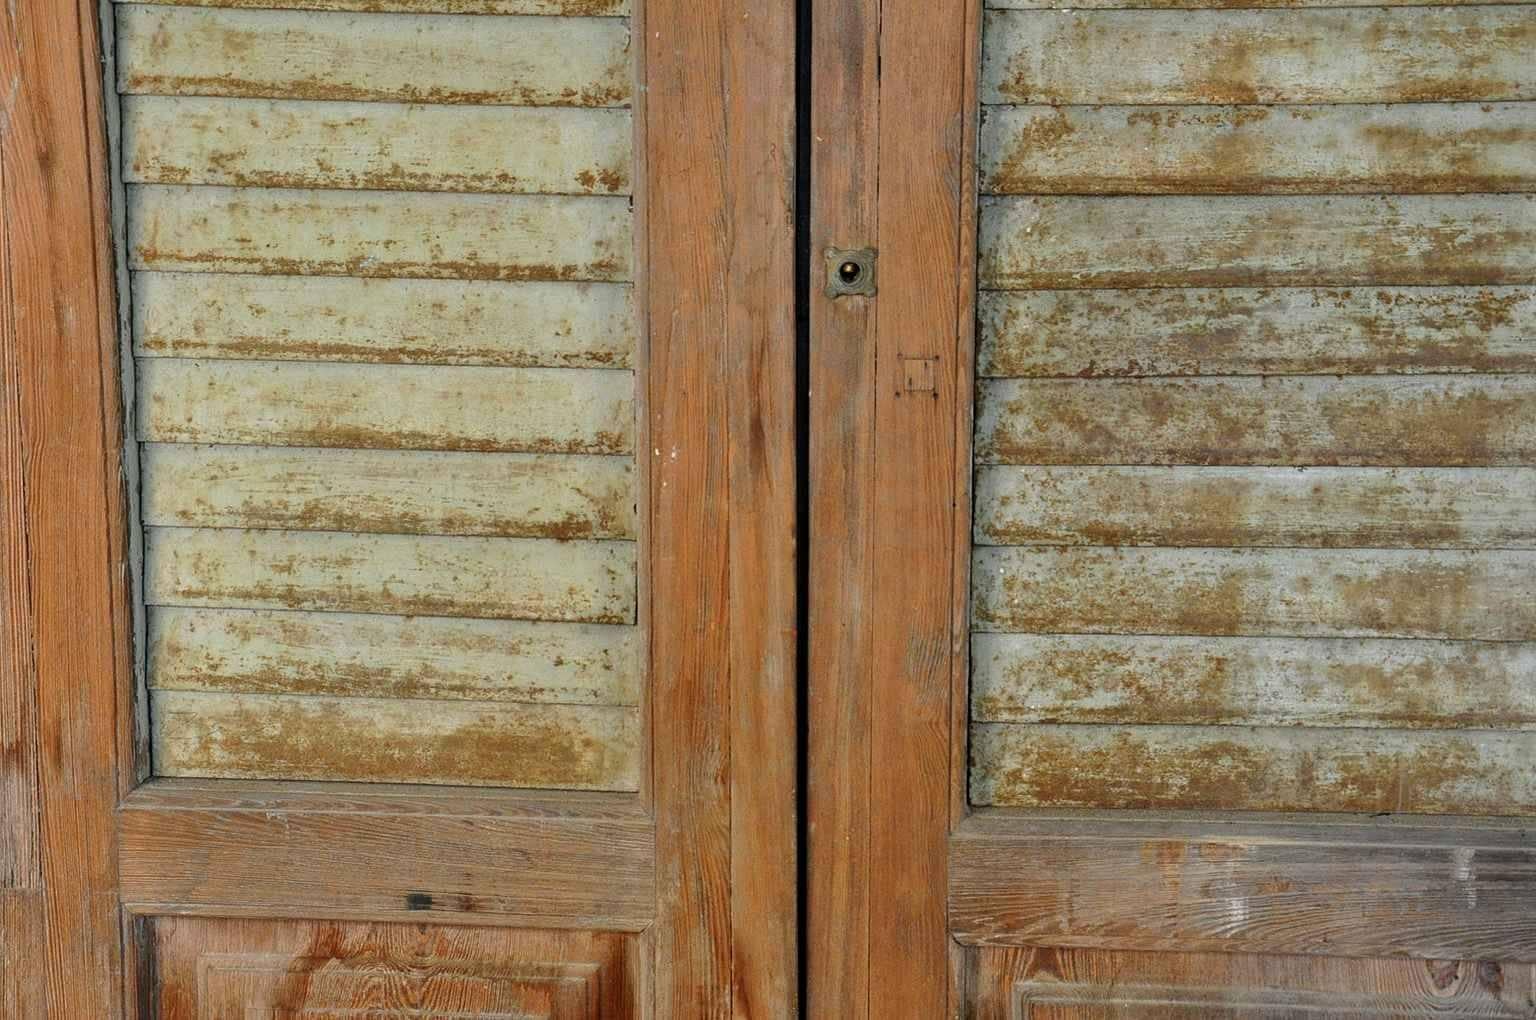 A terrific set of three washed, bleached wooden doors with painted metal louvered shutters. Wonderfully constructed with great patina. Not only fabulous built in, but would also serve beautifully as wall mounted art or headboard.